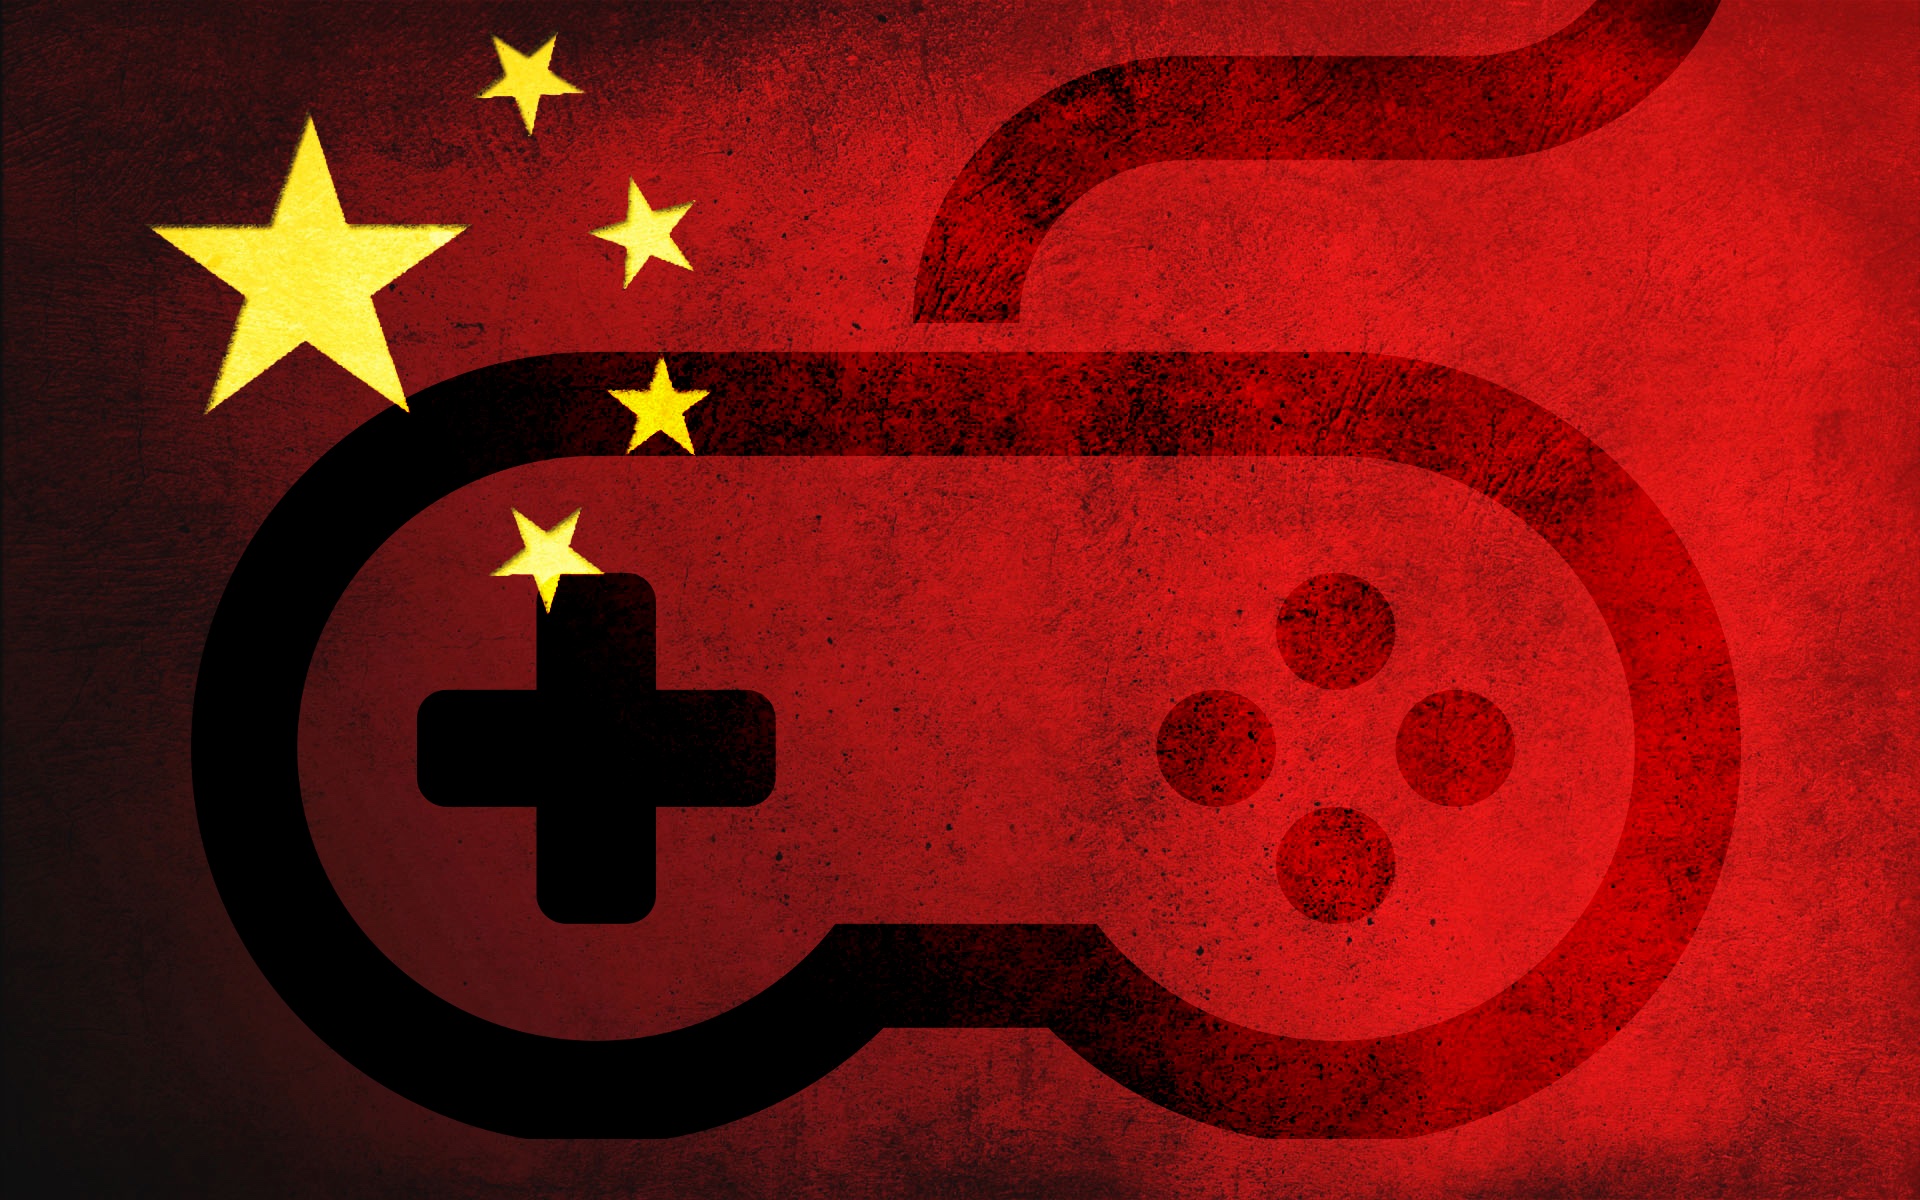 Bloomberg: China Approves More Games in a Step Toward Normalization